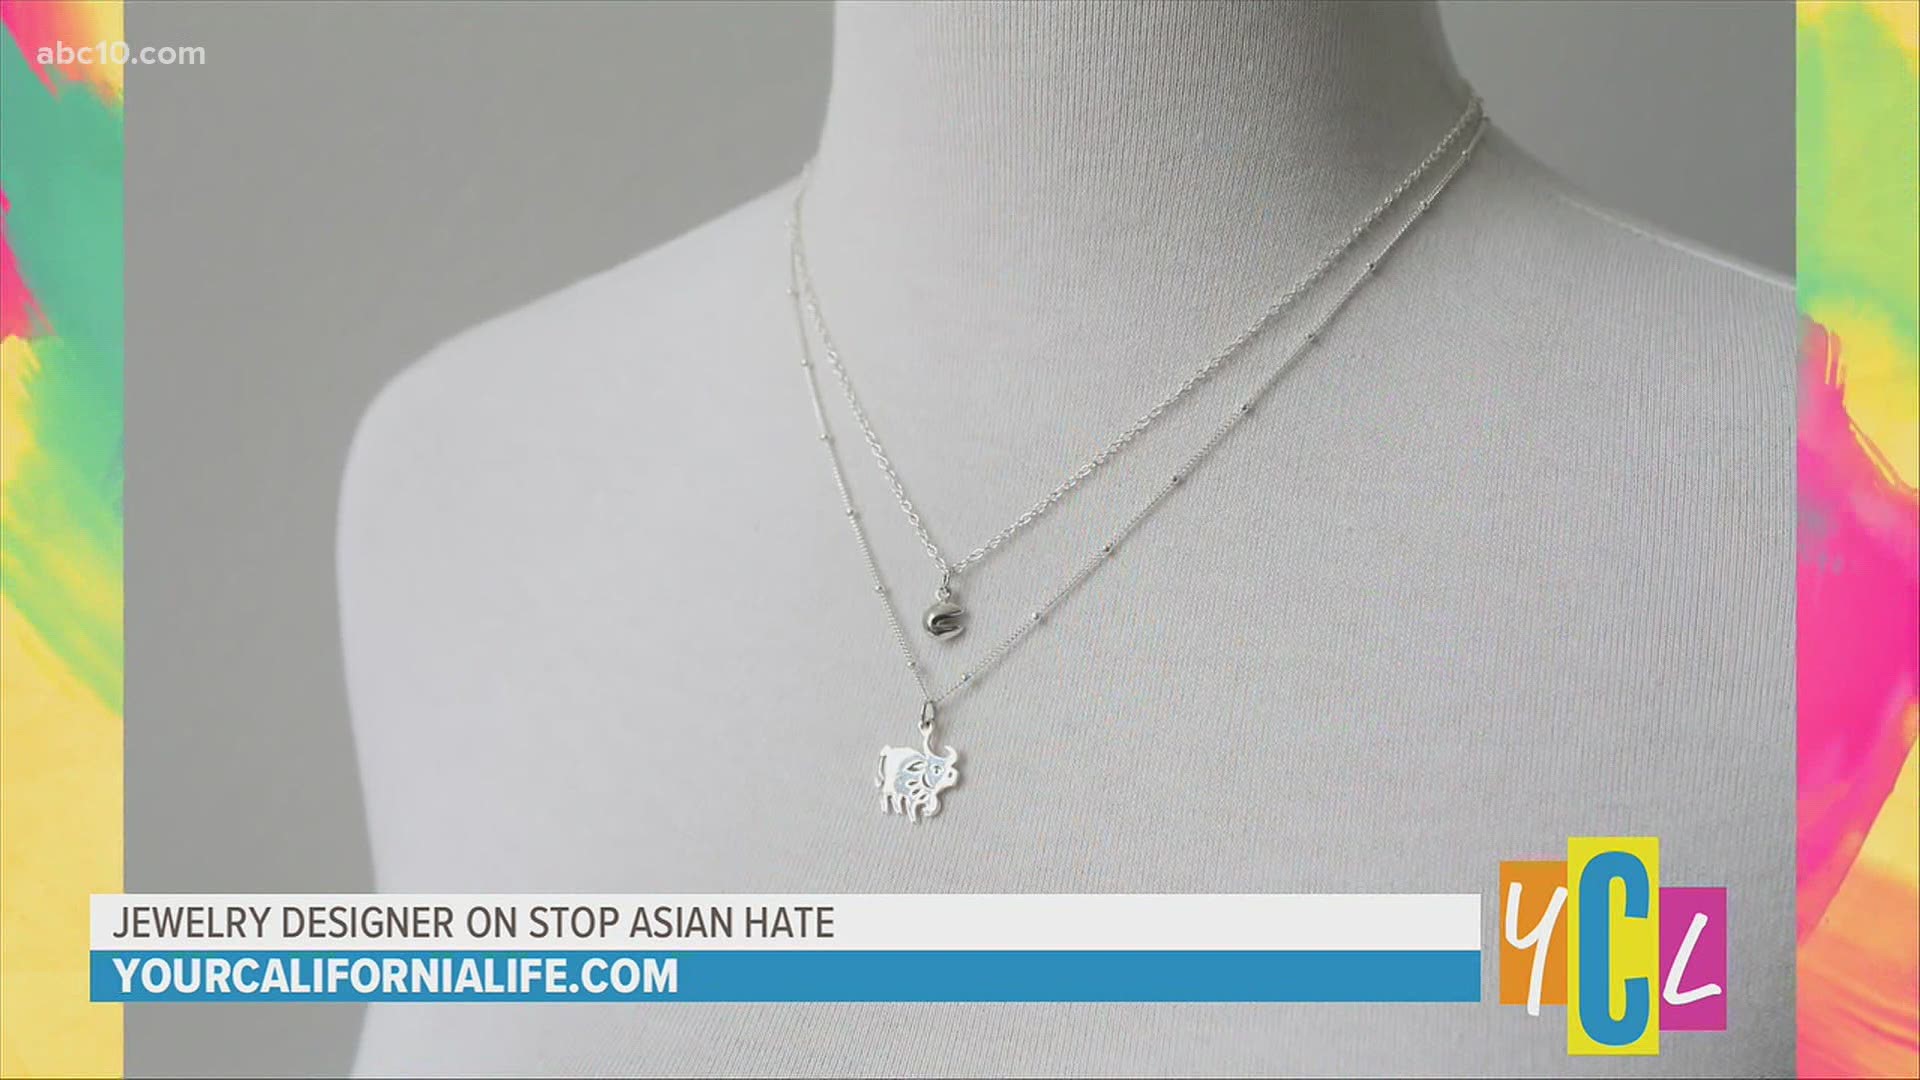 NorCal jewelry designer Peggy Li had created two special pieces, as a means to raise awareness, show support and give back in the effort to "Stop Asian Hate."